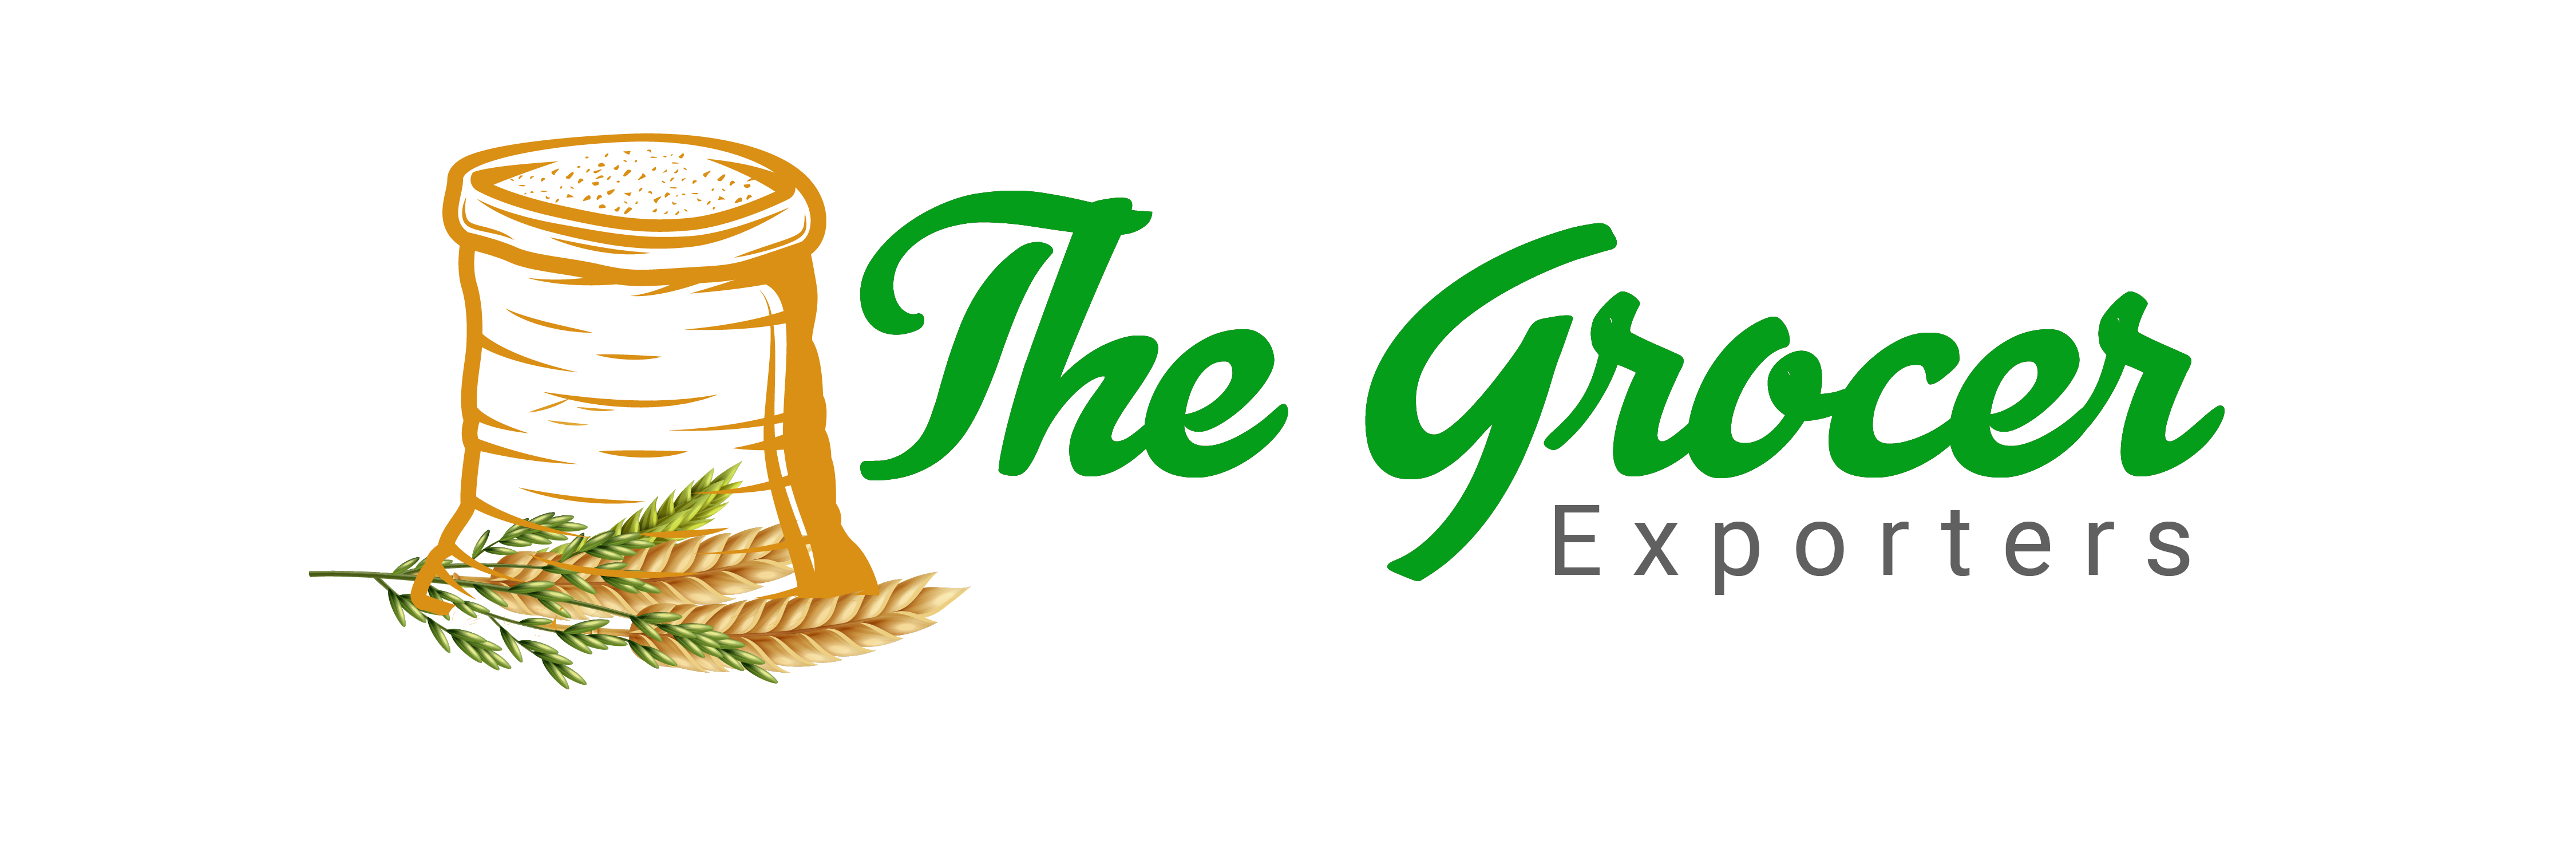 The grocer exporters 